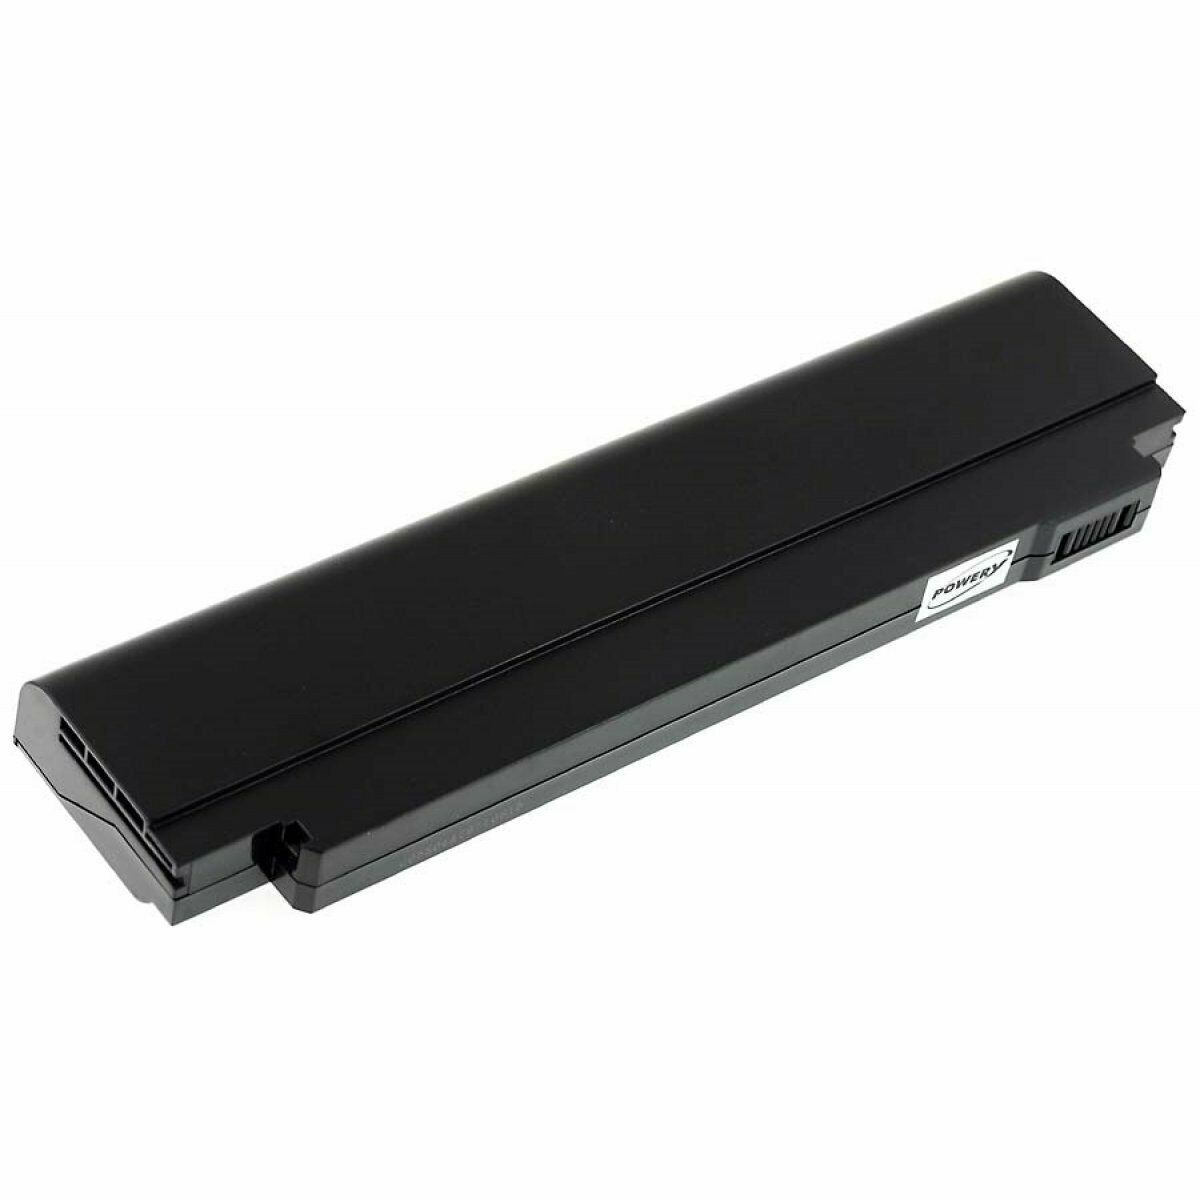 Batterie pour HASEE 9223BP,BP3S2P2150 HASEE CV13,CV17,CV27(compatible)